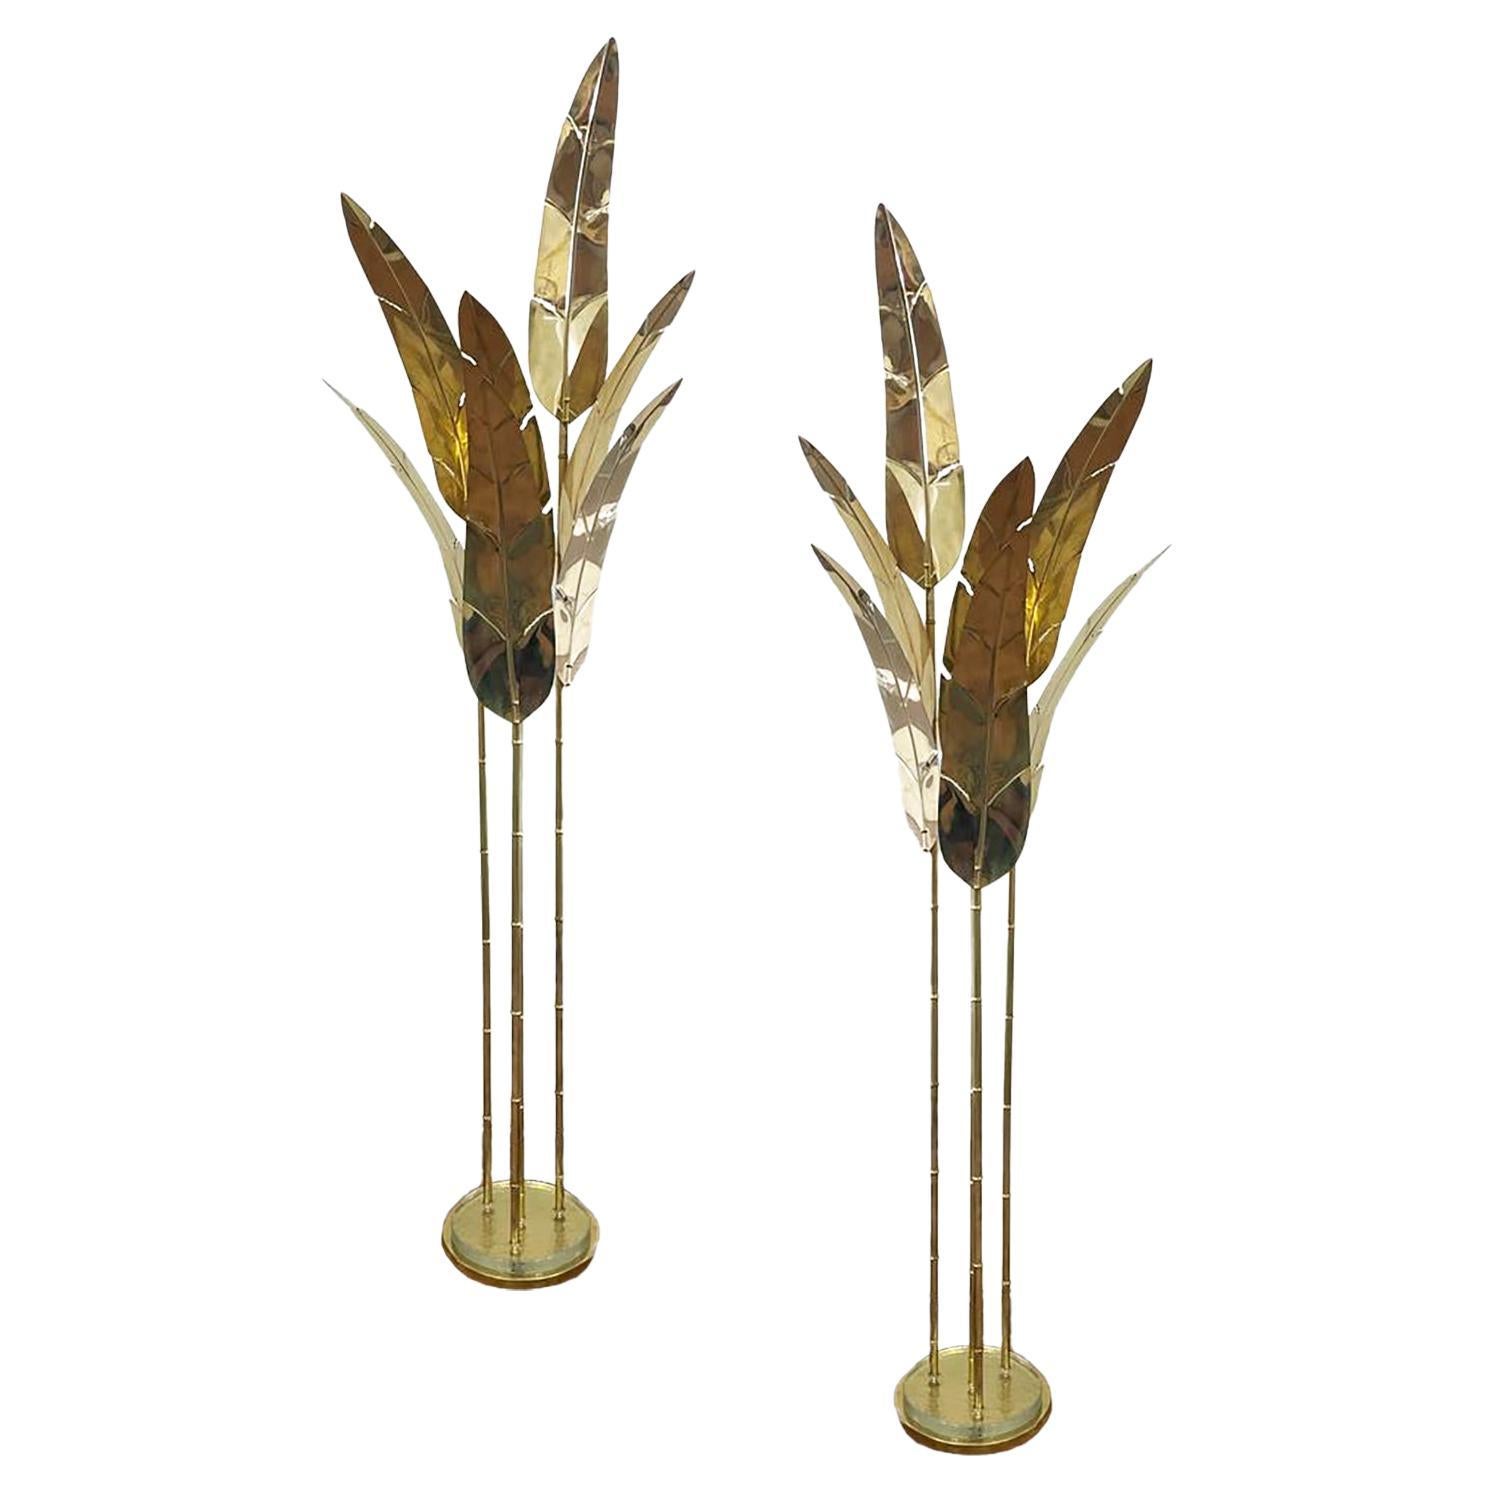 Contemporary Italian Art Deco Design Palm Tree Pair of 7-Leaf Brass Floor Lamps For Sale